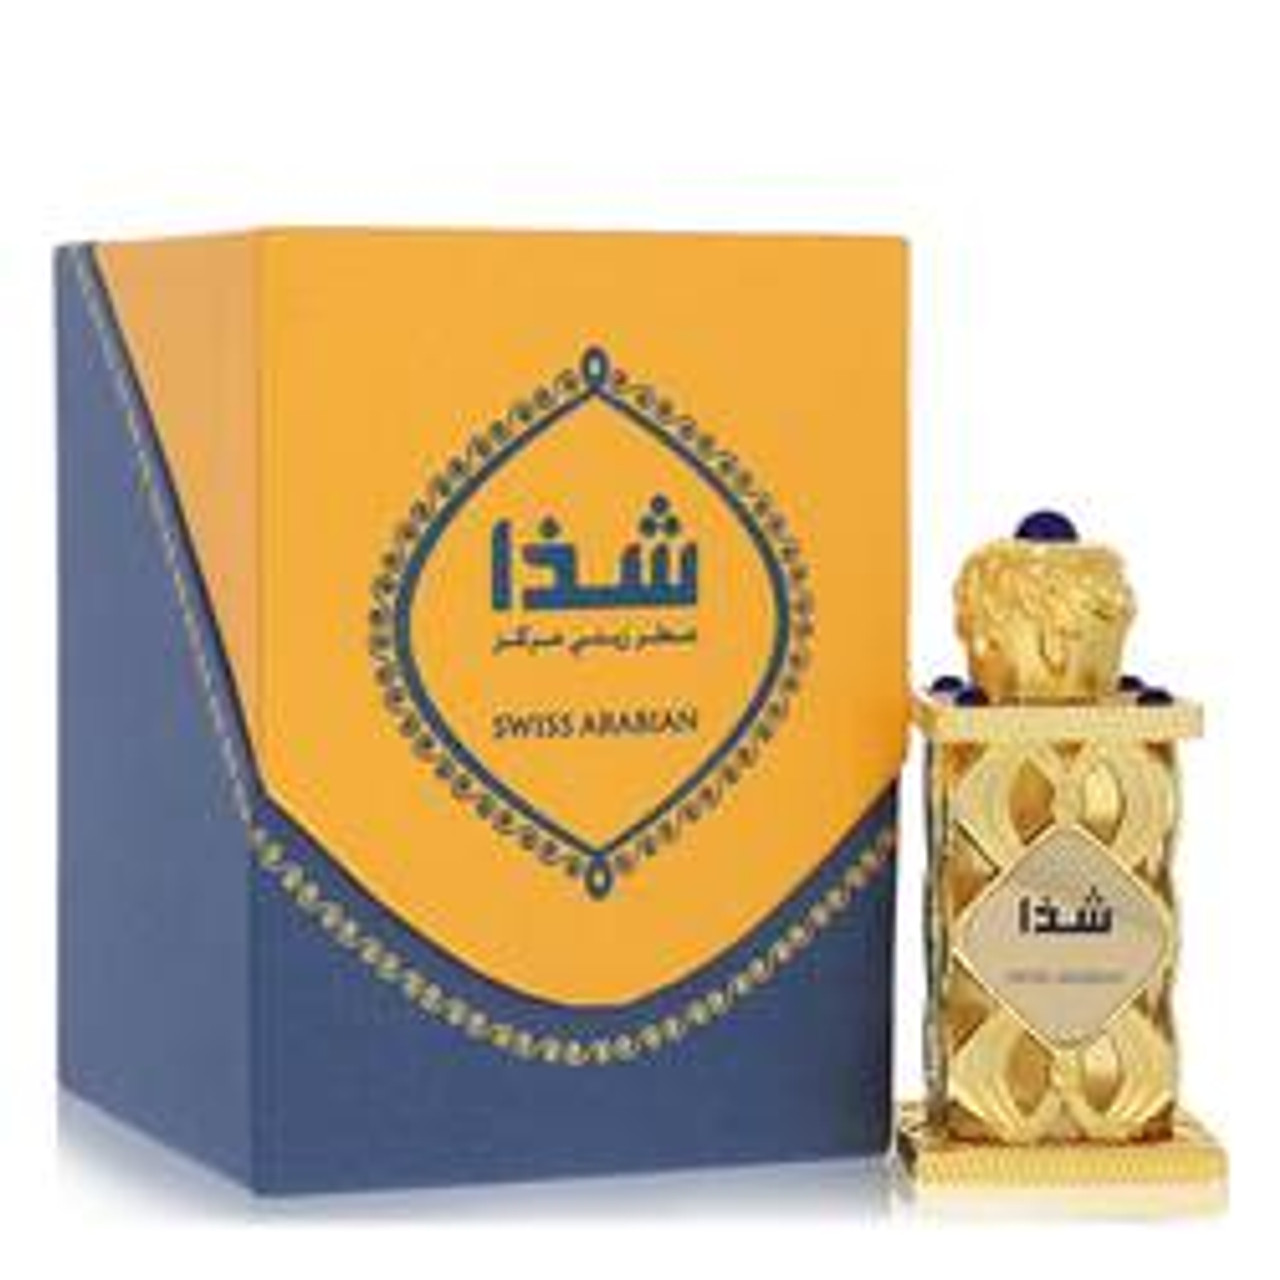 Swiss Arabian Shadha Perfume By Swiss Arabian Concentrated Perfume Oil 0.6 oz for Women - [From 112.00 - Choose pk Qty ] - *Ships from Miami